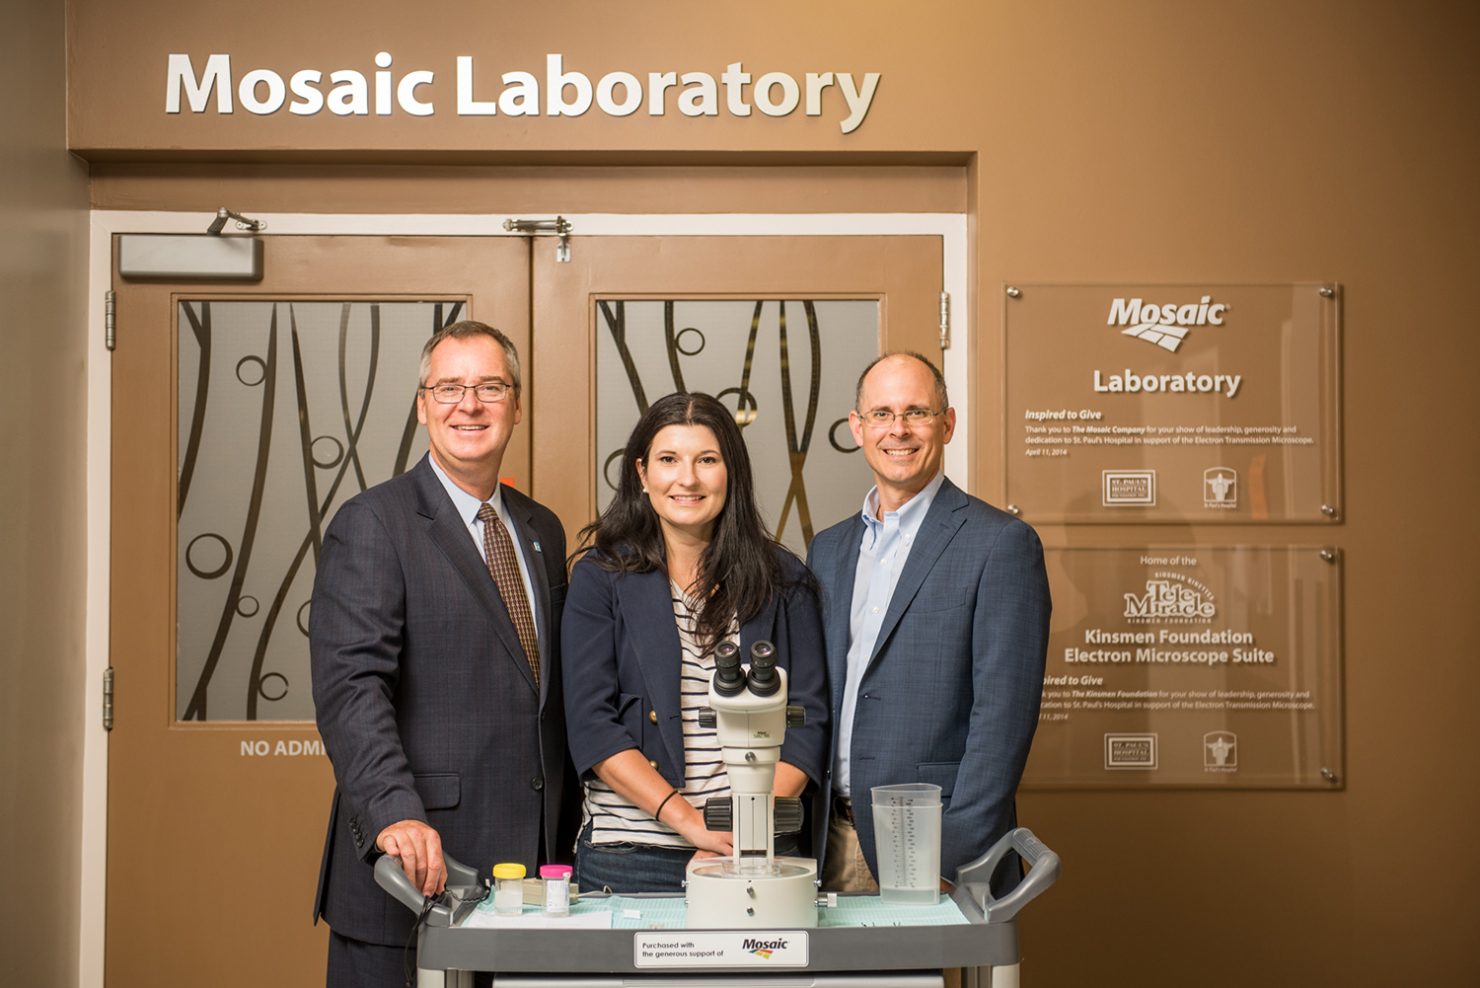 SPH Foundation CEO Bruce Acton with Mosaic Senior Director of Public Affairs Sarah Fedorchuk and Mosaic Senior Vice President Bruce Bodine at the entrance to the Mosaic Laboratory at St. Paul’s Hospital (Saskatoon, Saskatchewan), which was funded by the company’s philanthropy.